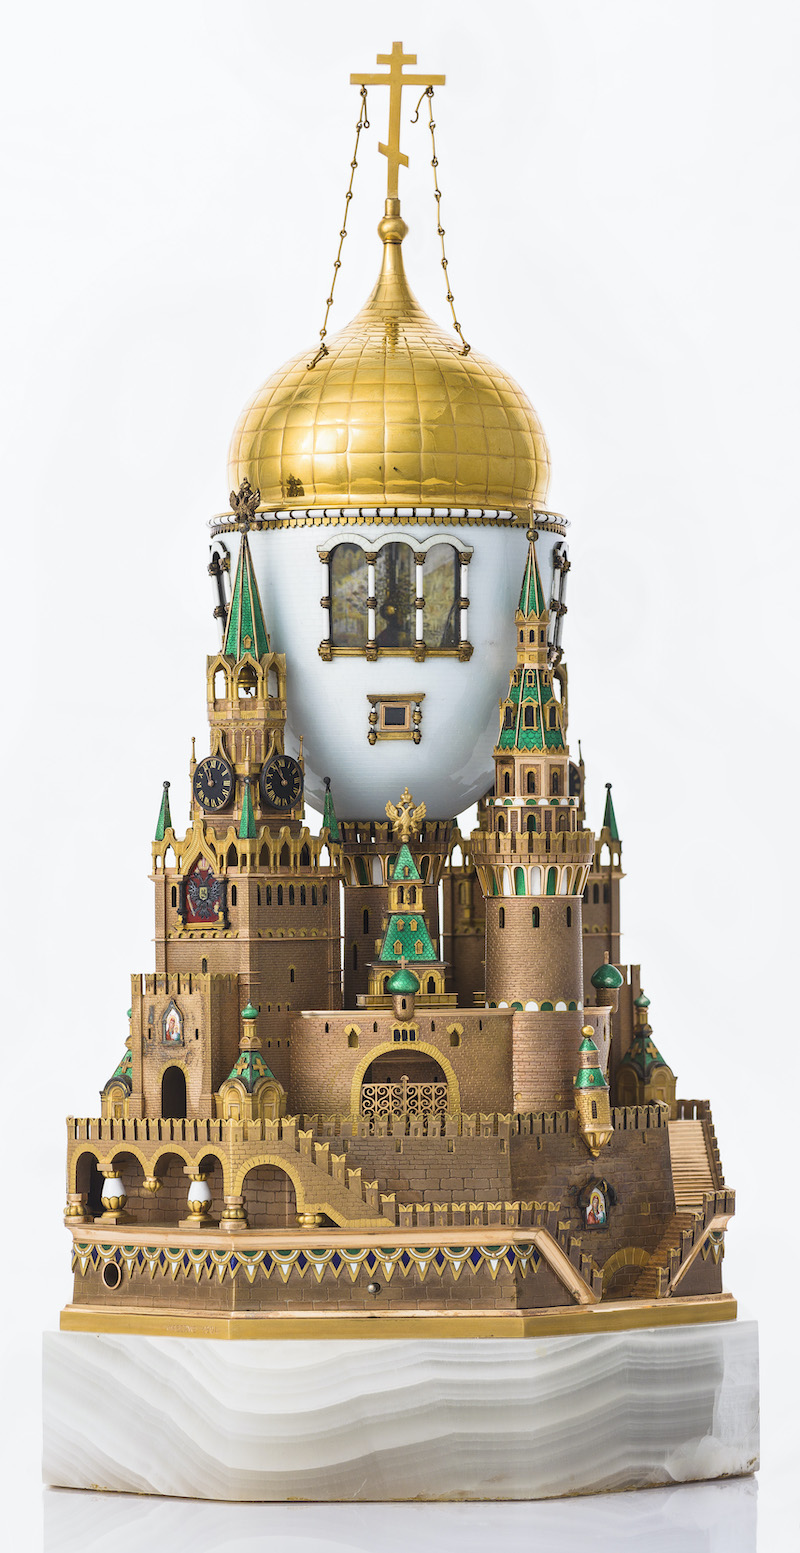 The Moscow Kremlin Egg by Fabergé (1906). Courtesy of The Moscow Kremlin Museums